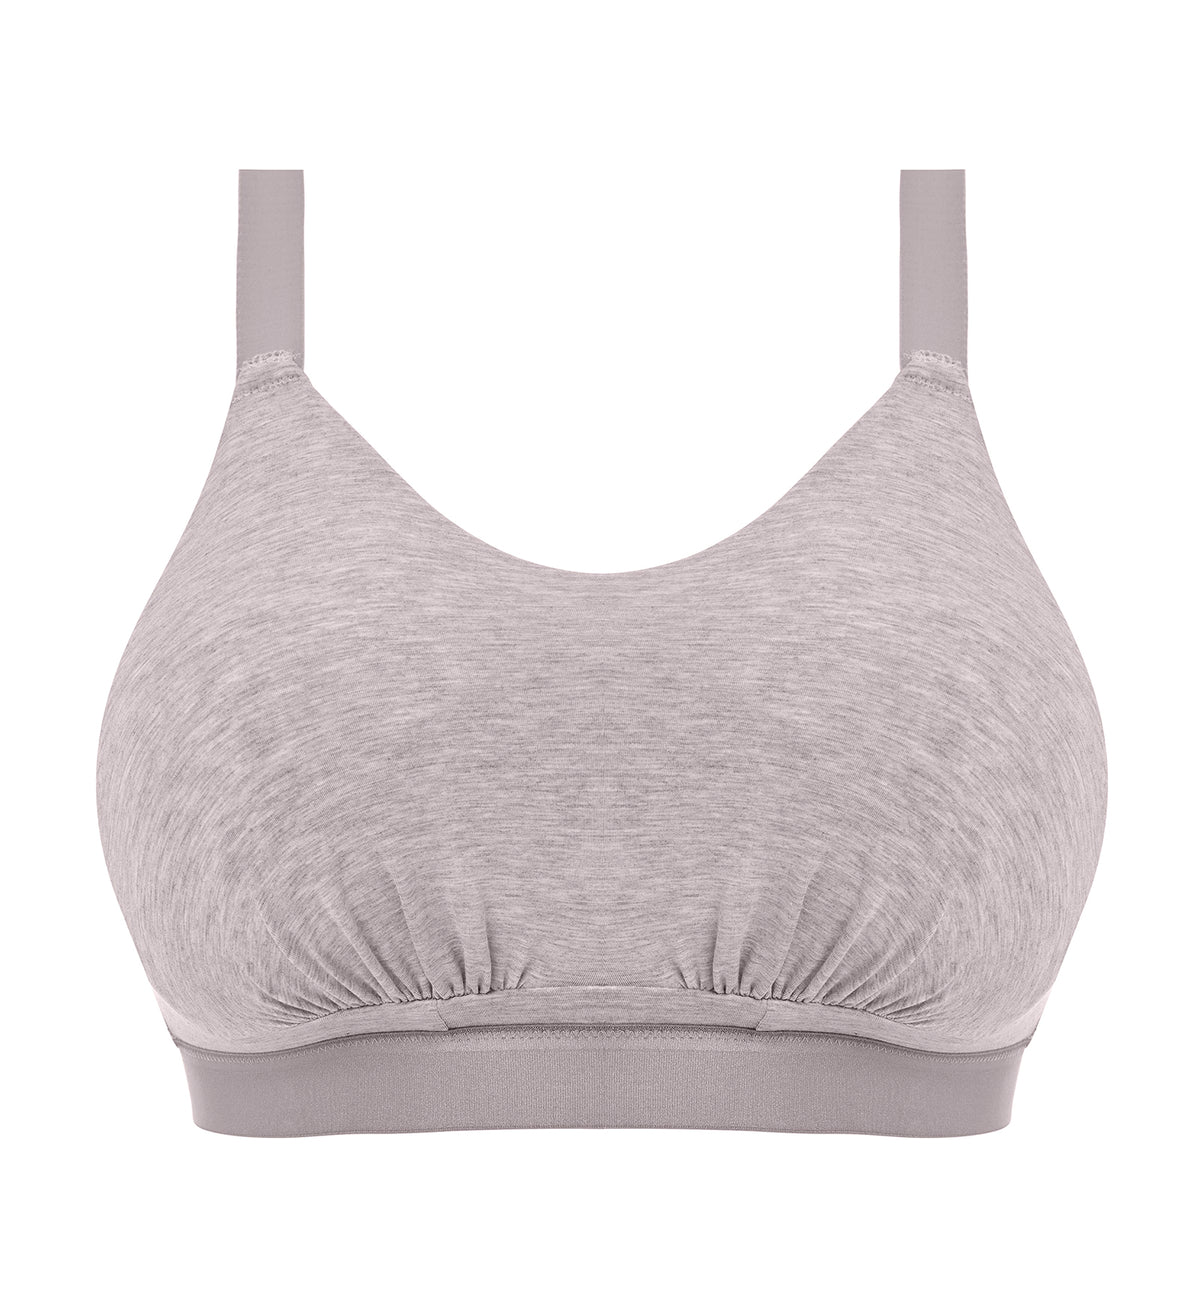 Elomi Downtime Non Wire Bralette (301417),44G,Grey Marl - Grey Marl,44G